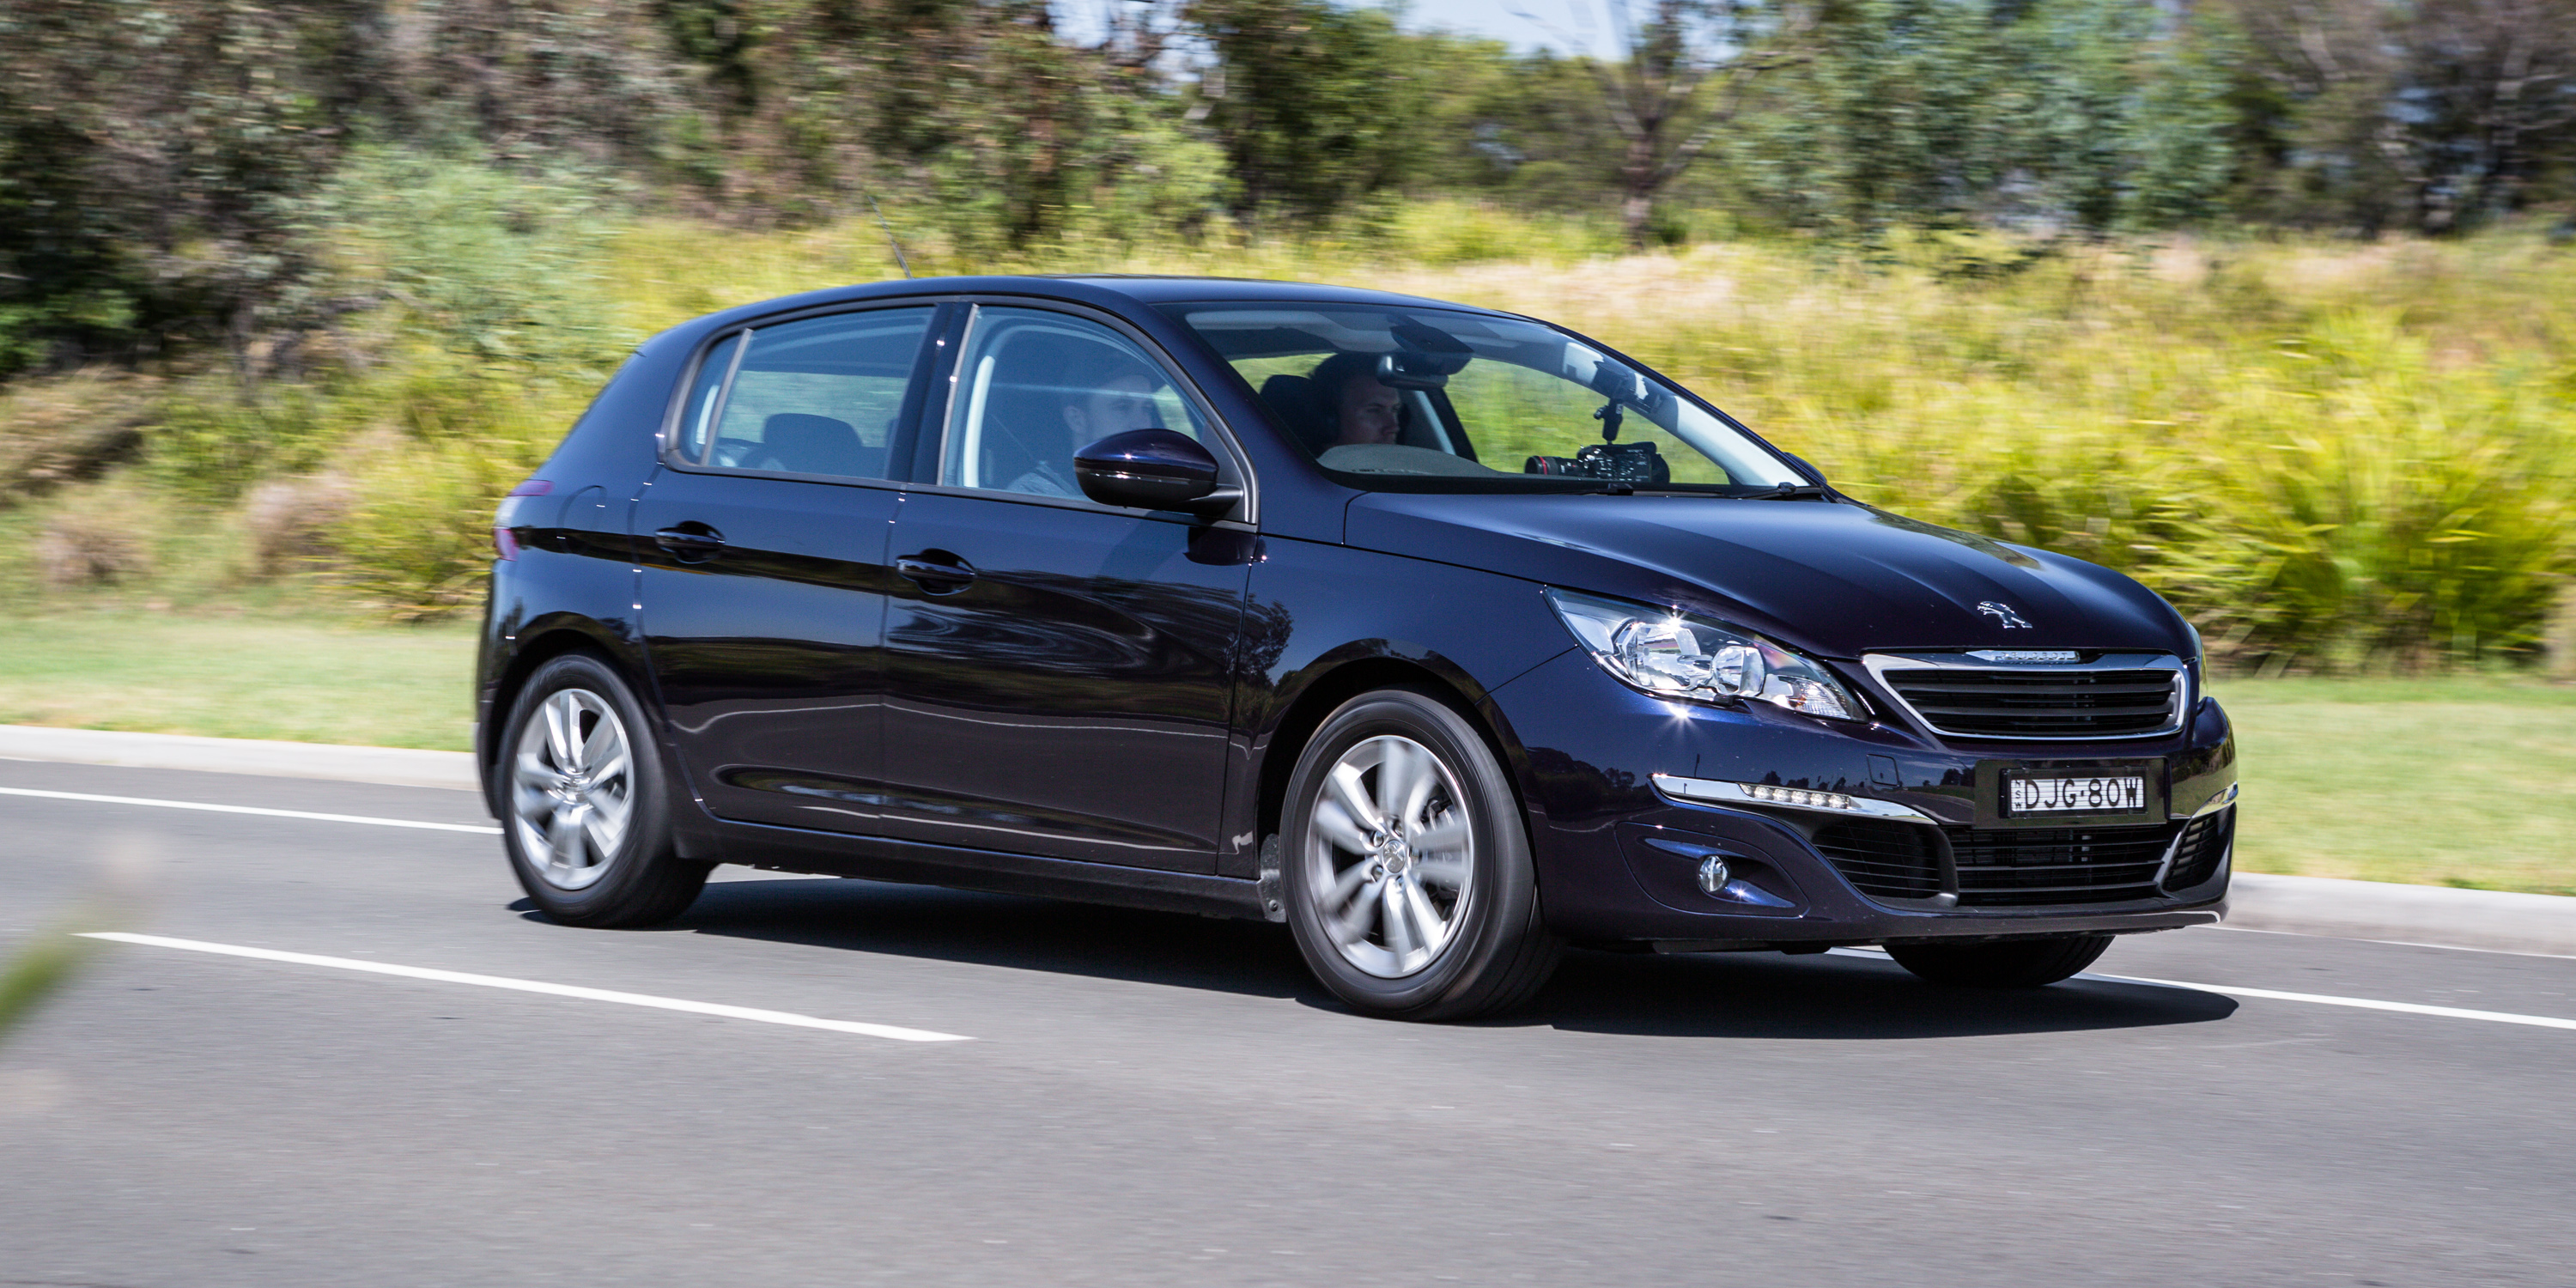 2017 Peugeot 308 Active review: Long-term report five – highway and country driving - Photos